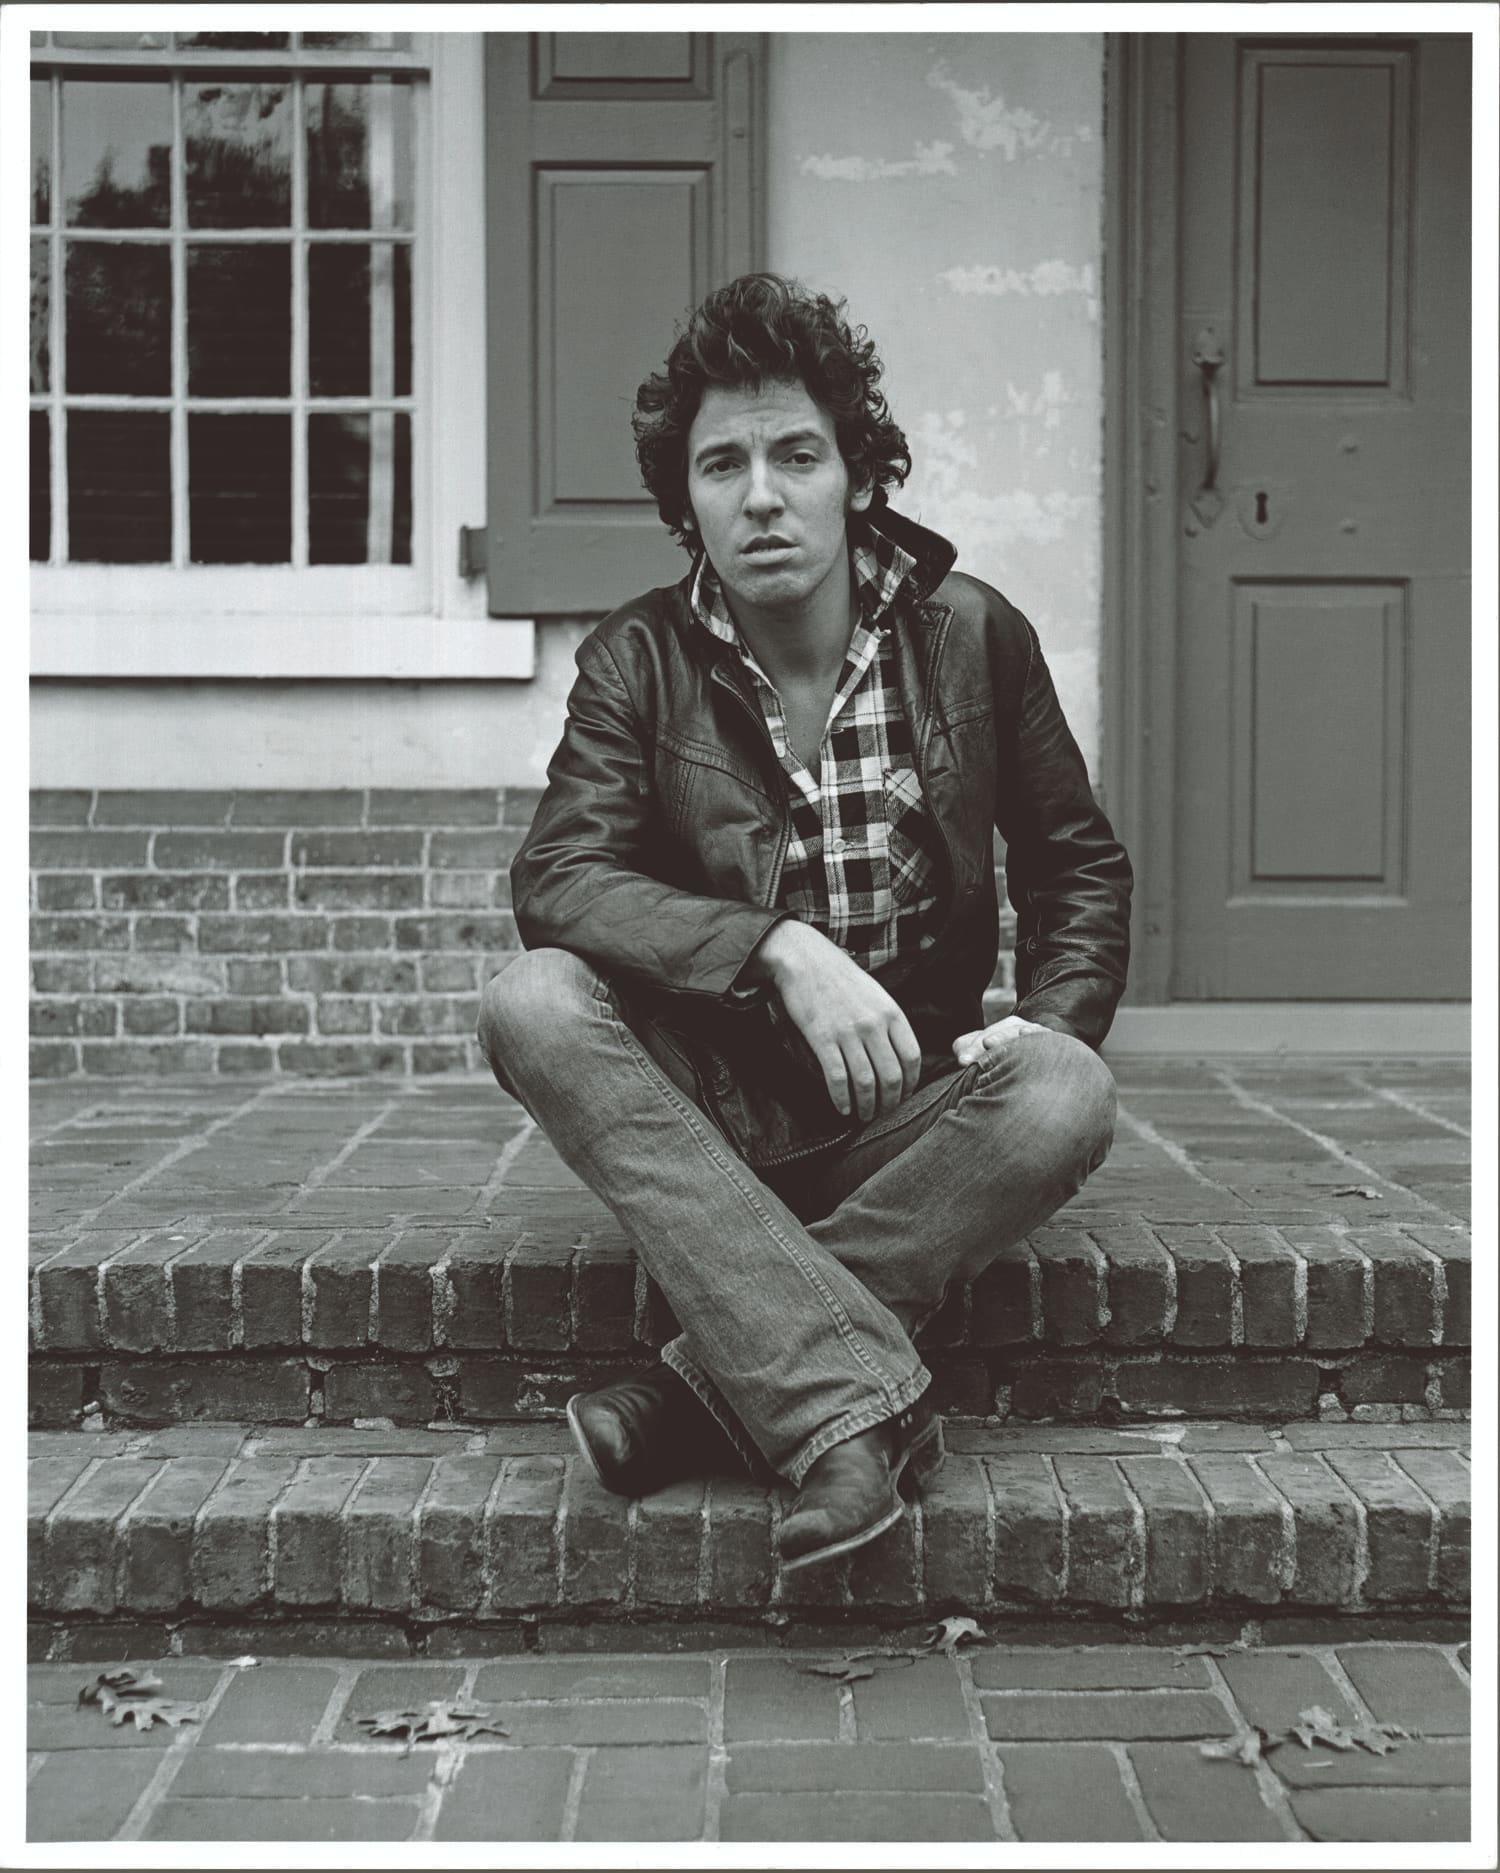 Bruce Springsteen Darkness on the Edge of Town era photo by Frank Stefanko